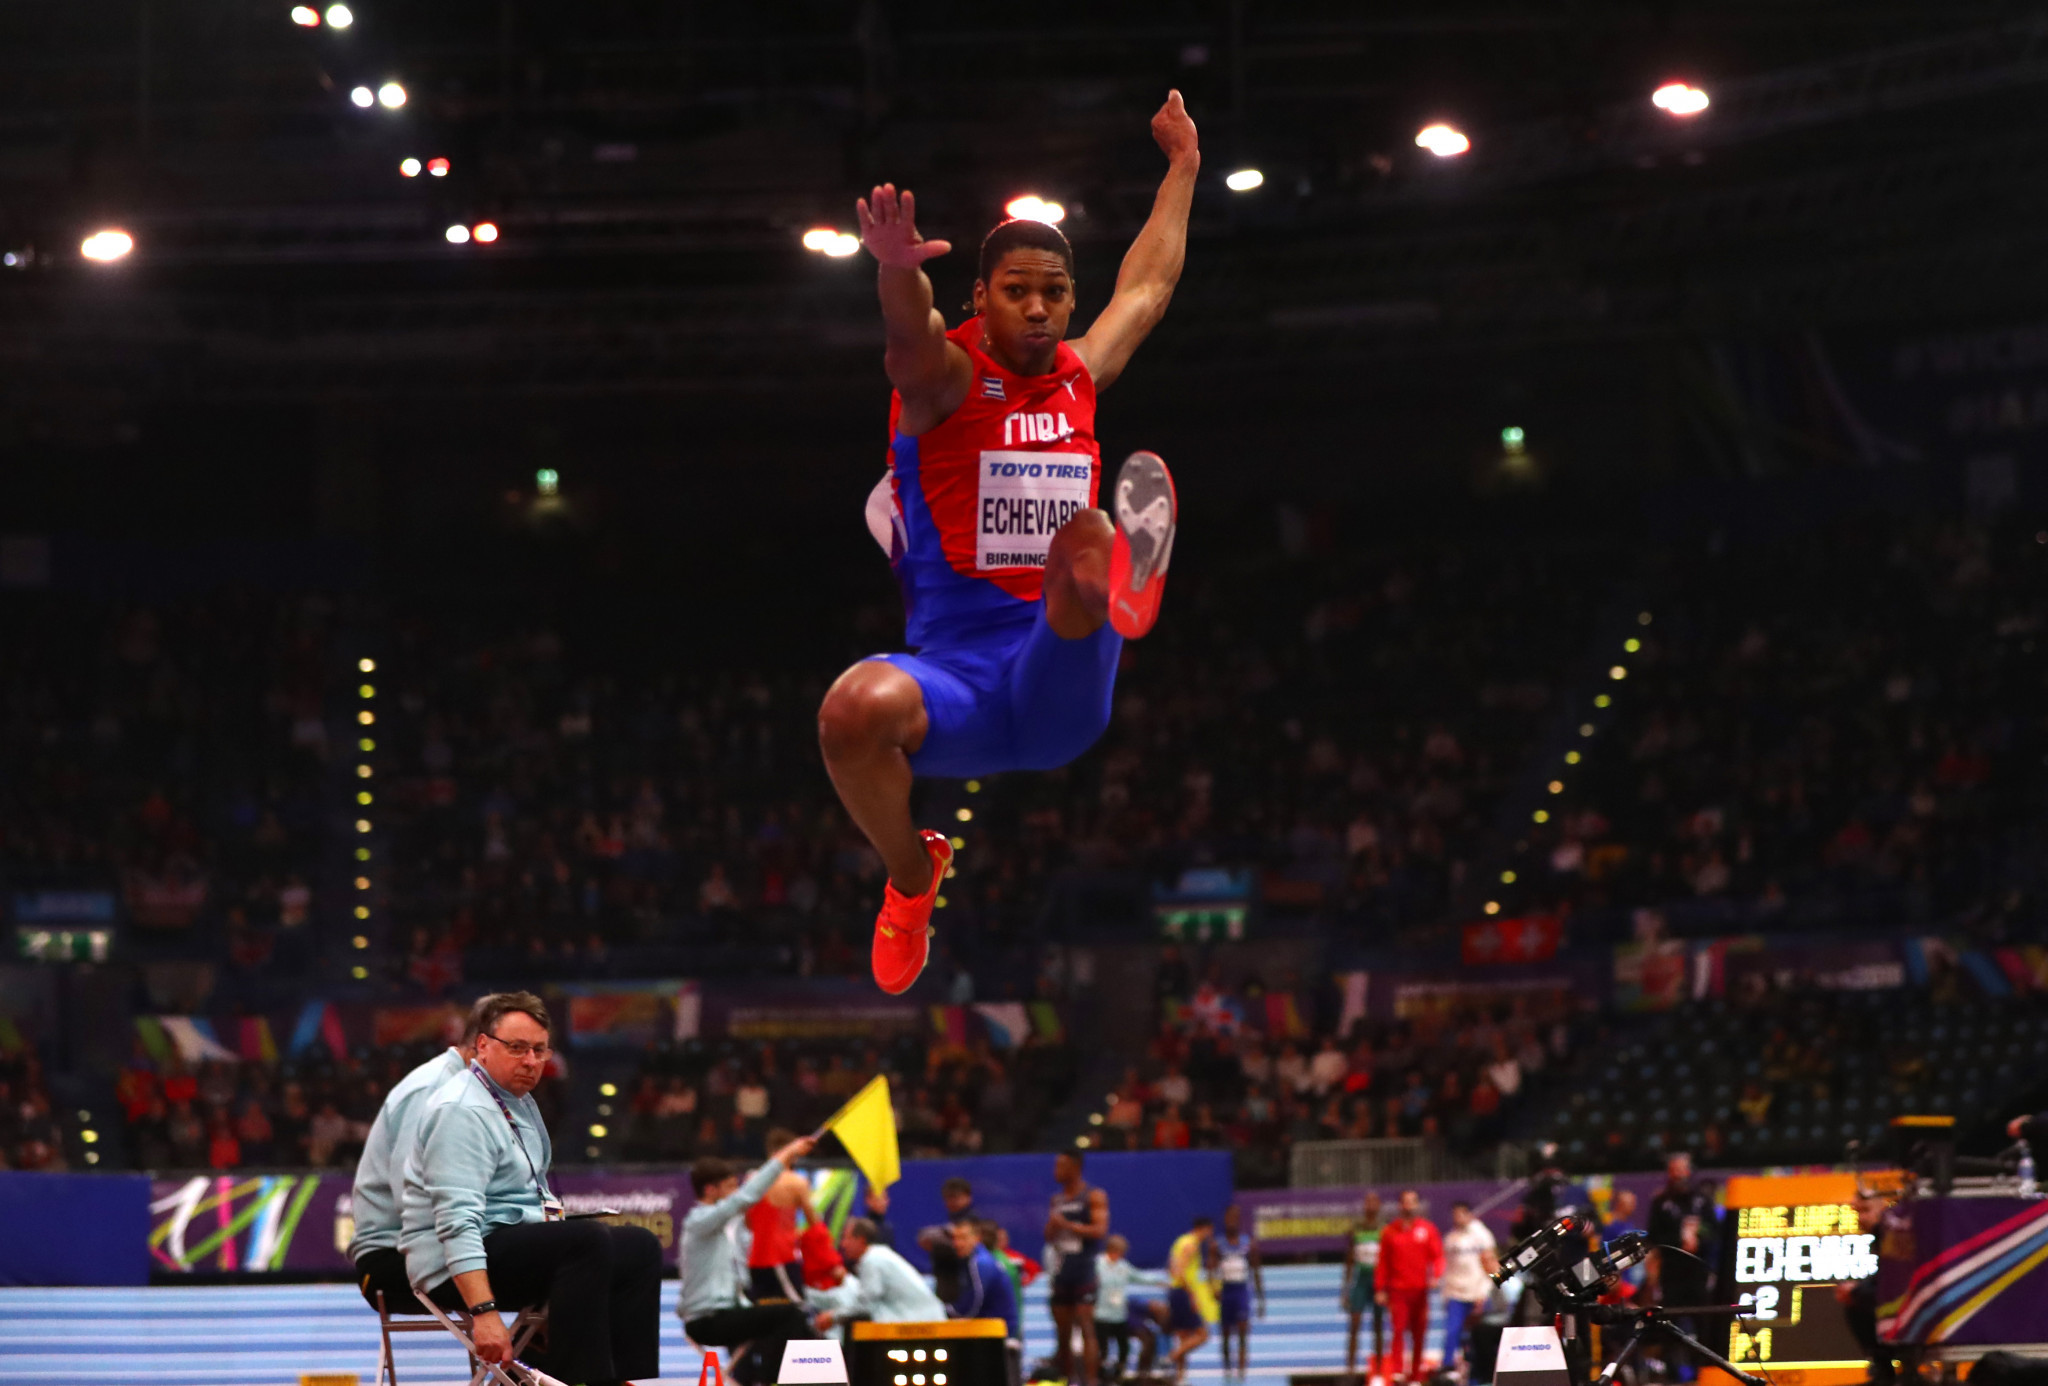 All eyes on long jumper Echevarría with IAAF World Indoor Tour set to resume in Karlsruhe